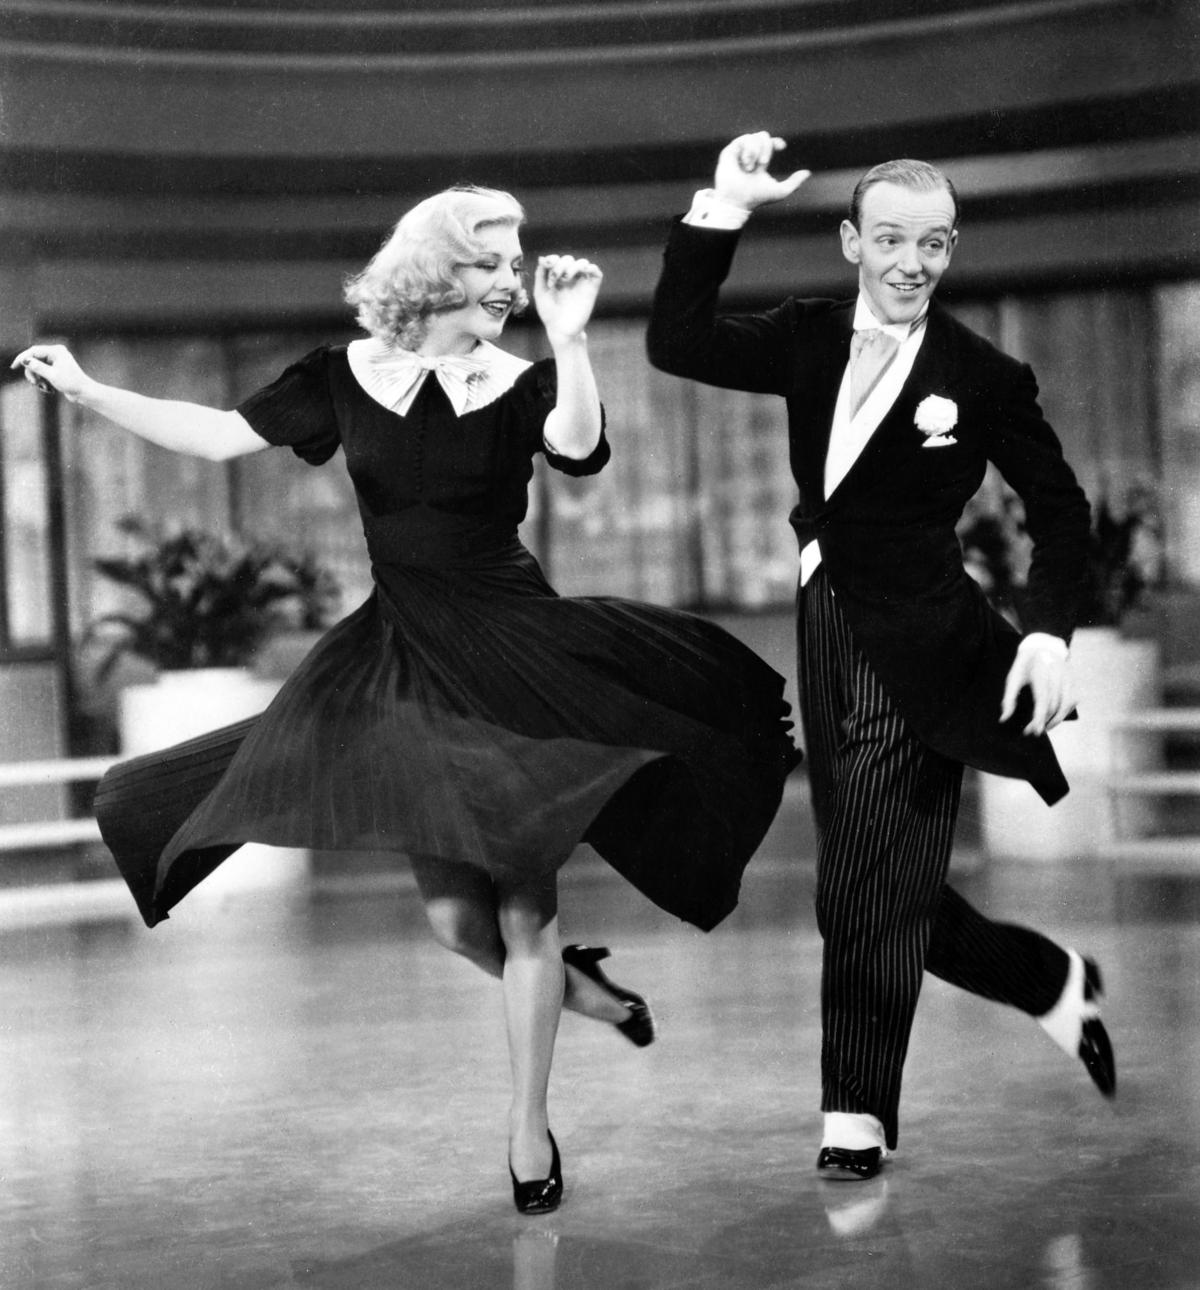 A publicity still of the 1936 film “Swing Time” starring Fred Astaire and Ginger Rogers. (MovieStillsDB)